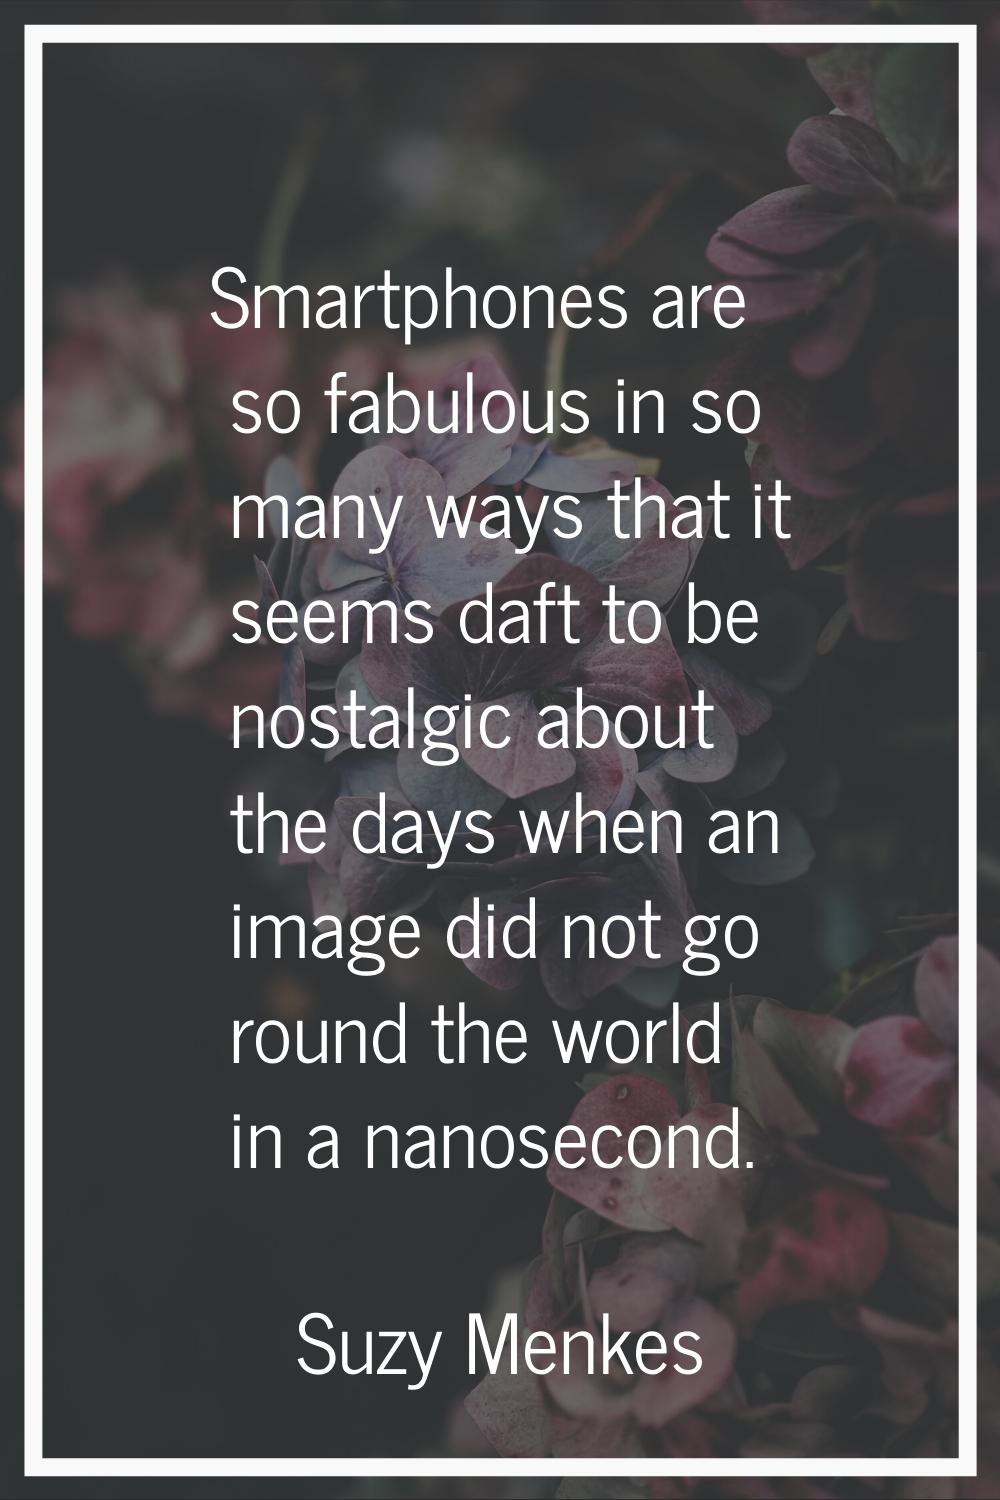 Smartphones are so fabulous in so many ways that it seems daft to be nostalgic about the days when 